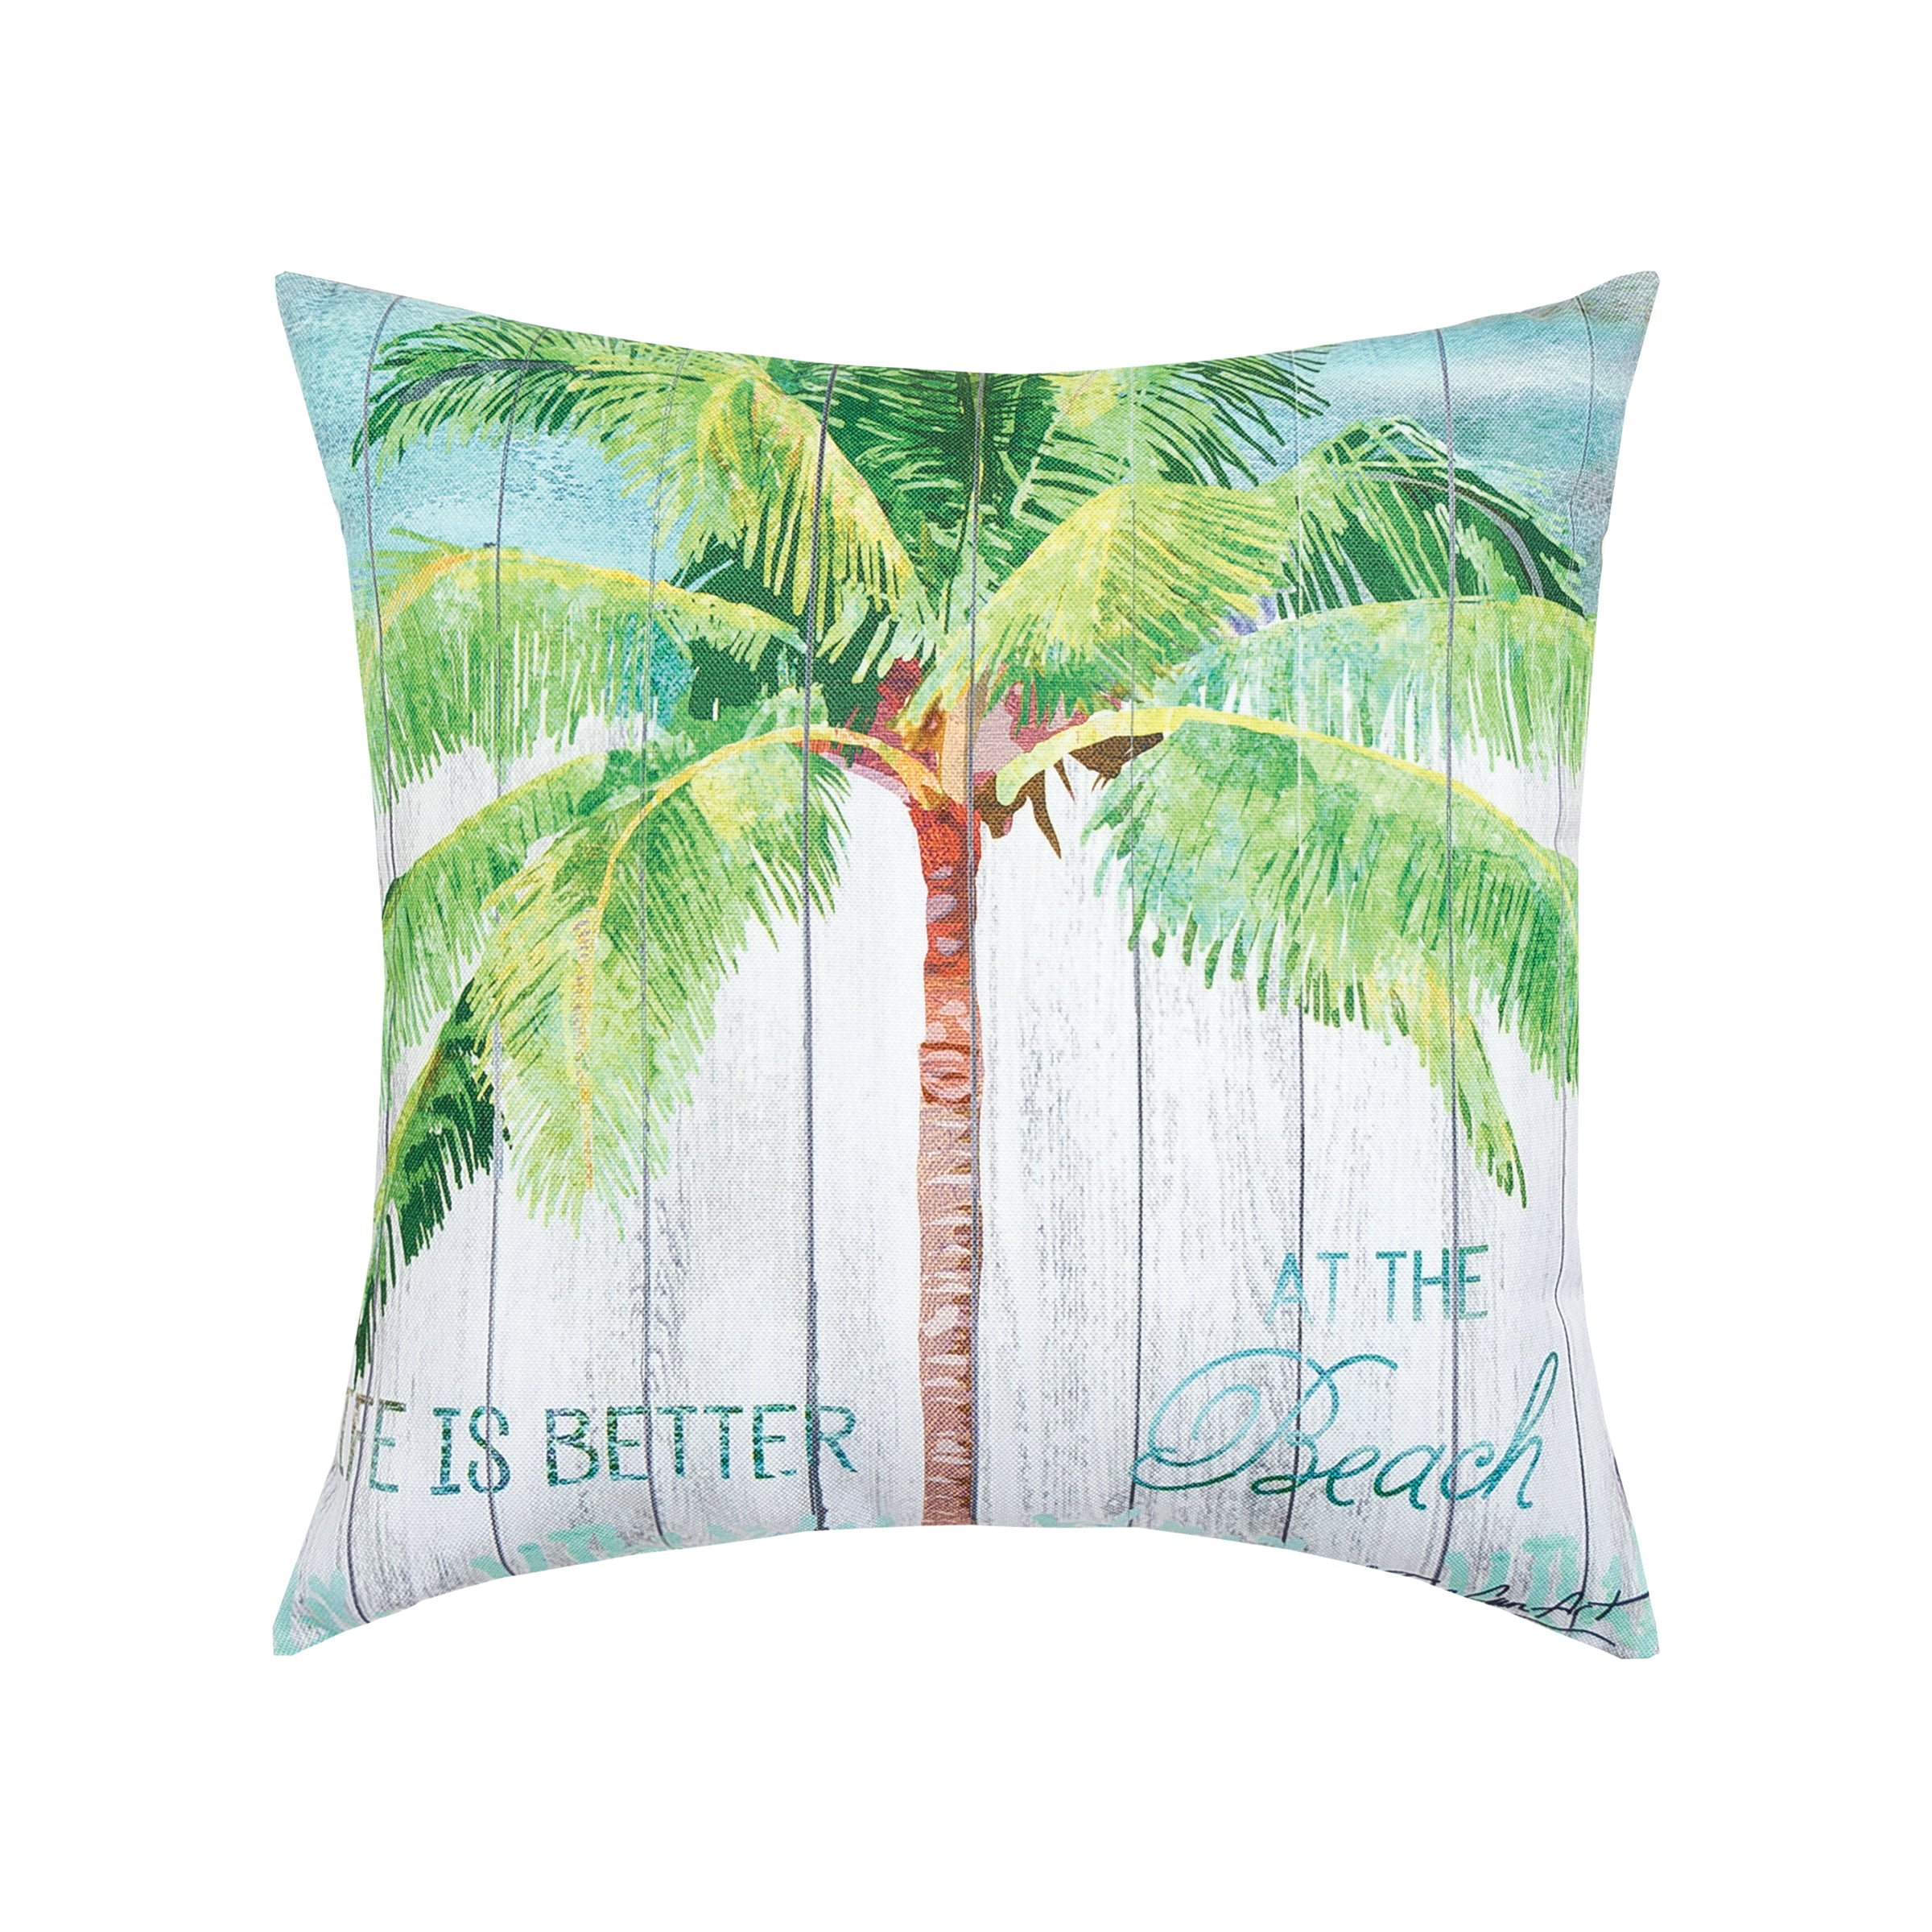 C&F Home - At The Beach 18 x 18 Indoor/Outdoor Pillow